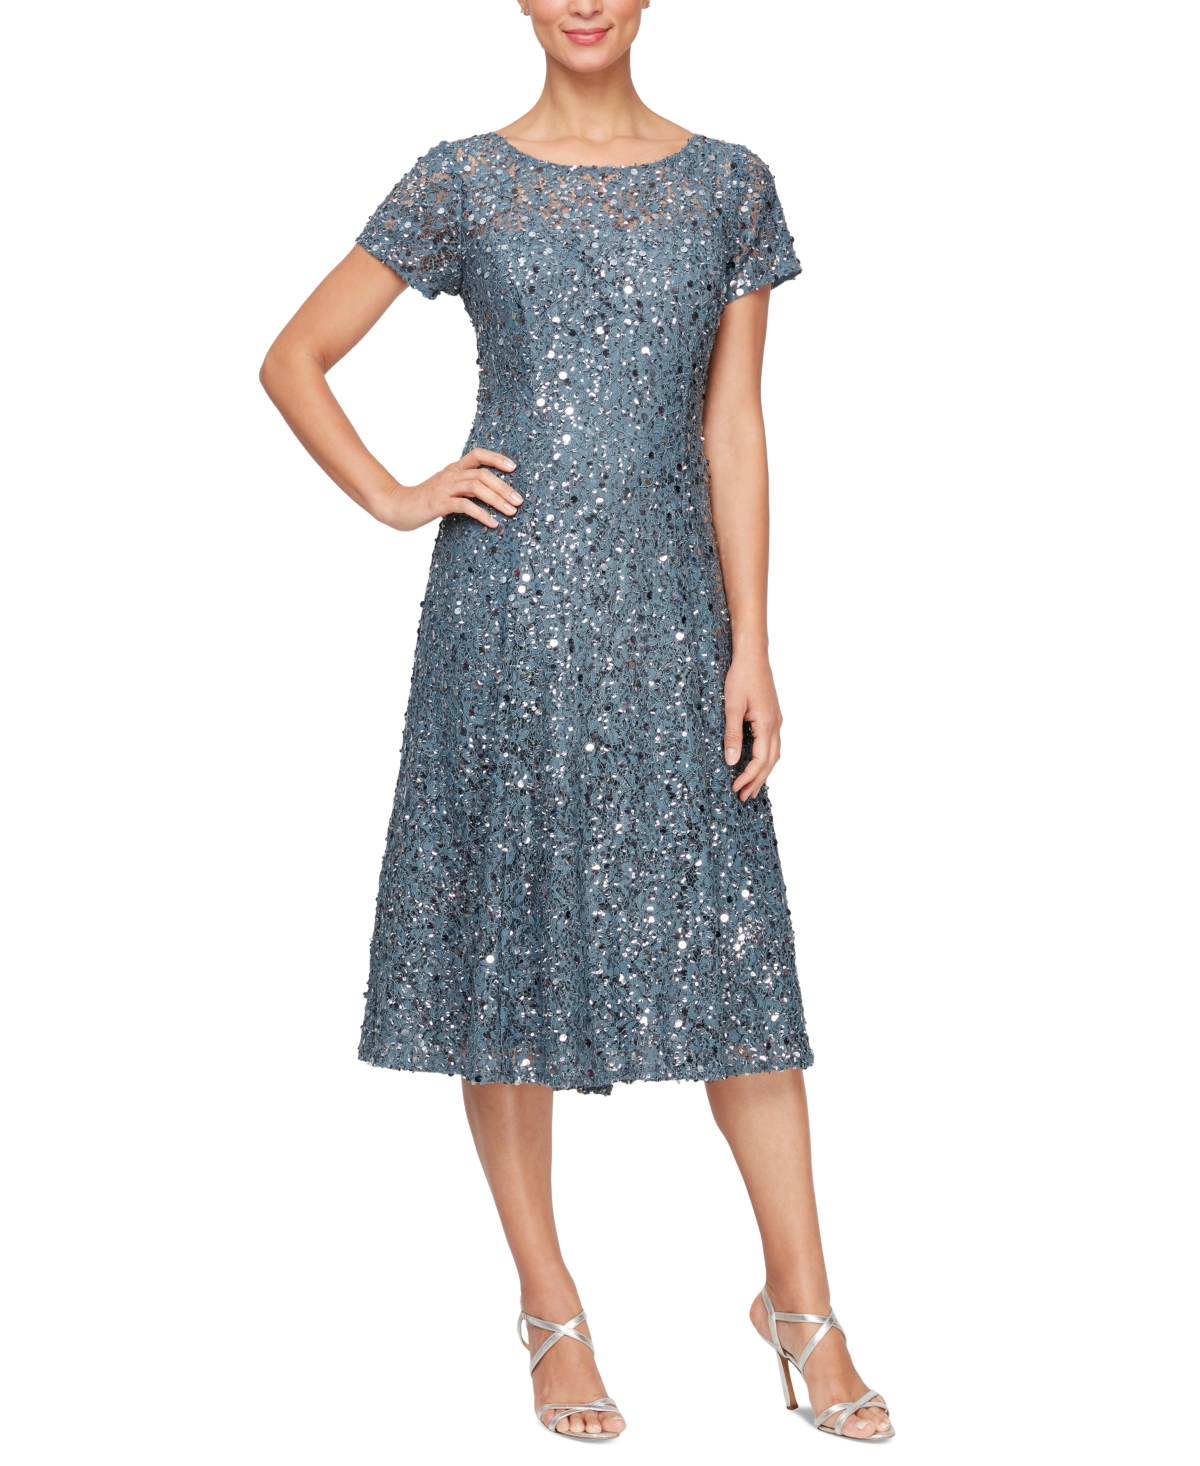 Women's Sequined Embroidered A-Line Dress - Steel Blue